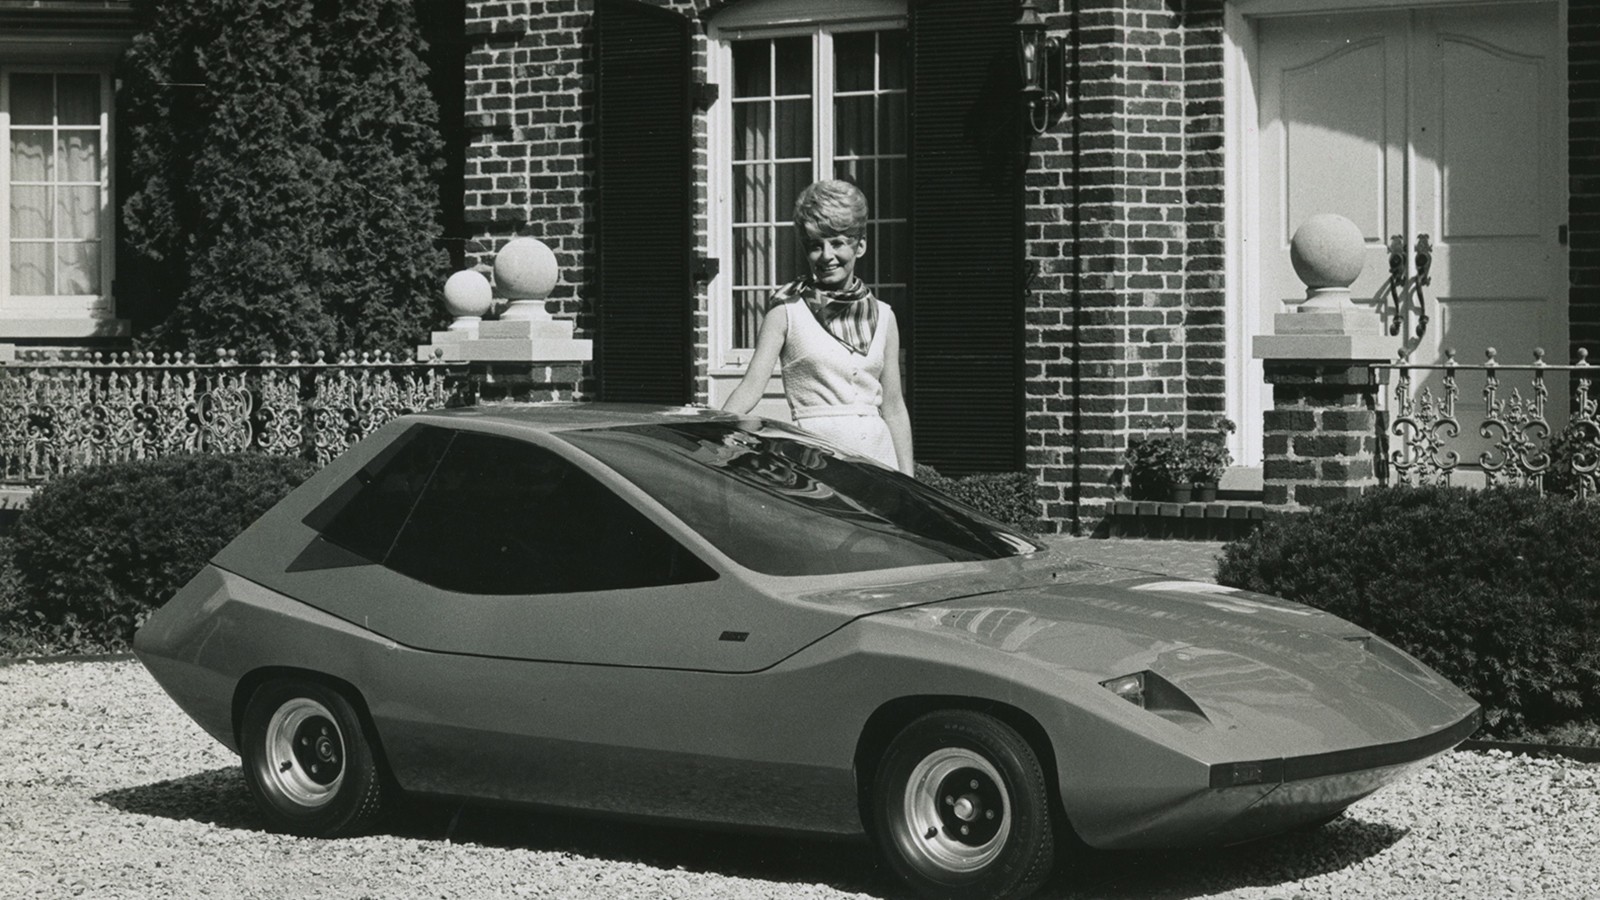 10 classic electric cars you never knew existed - McKee Sundancer